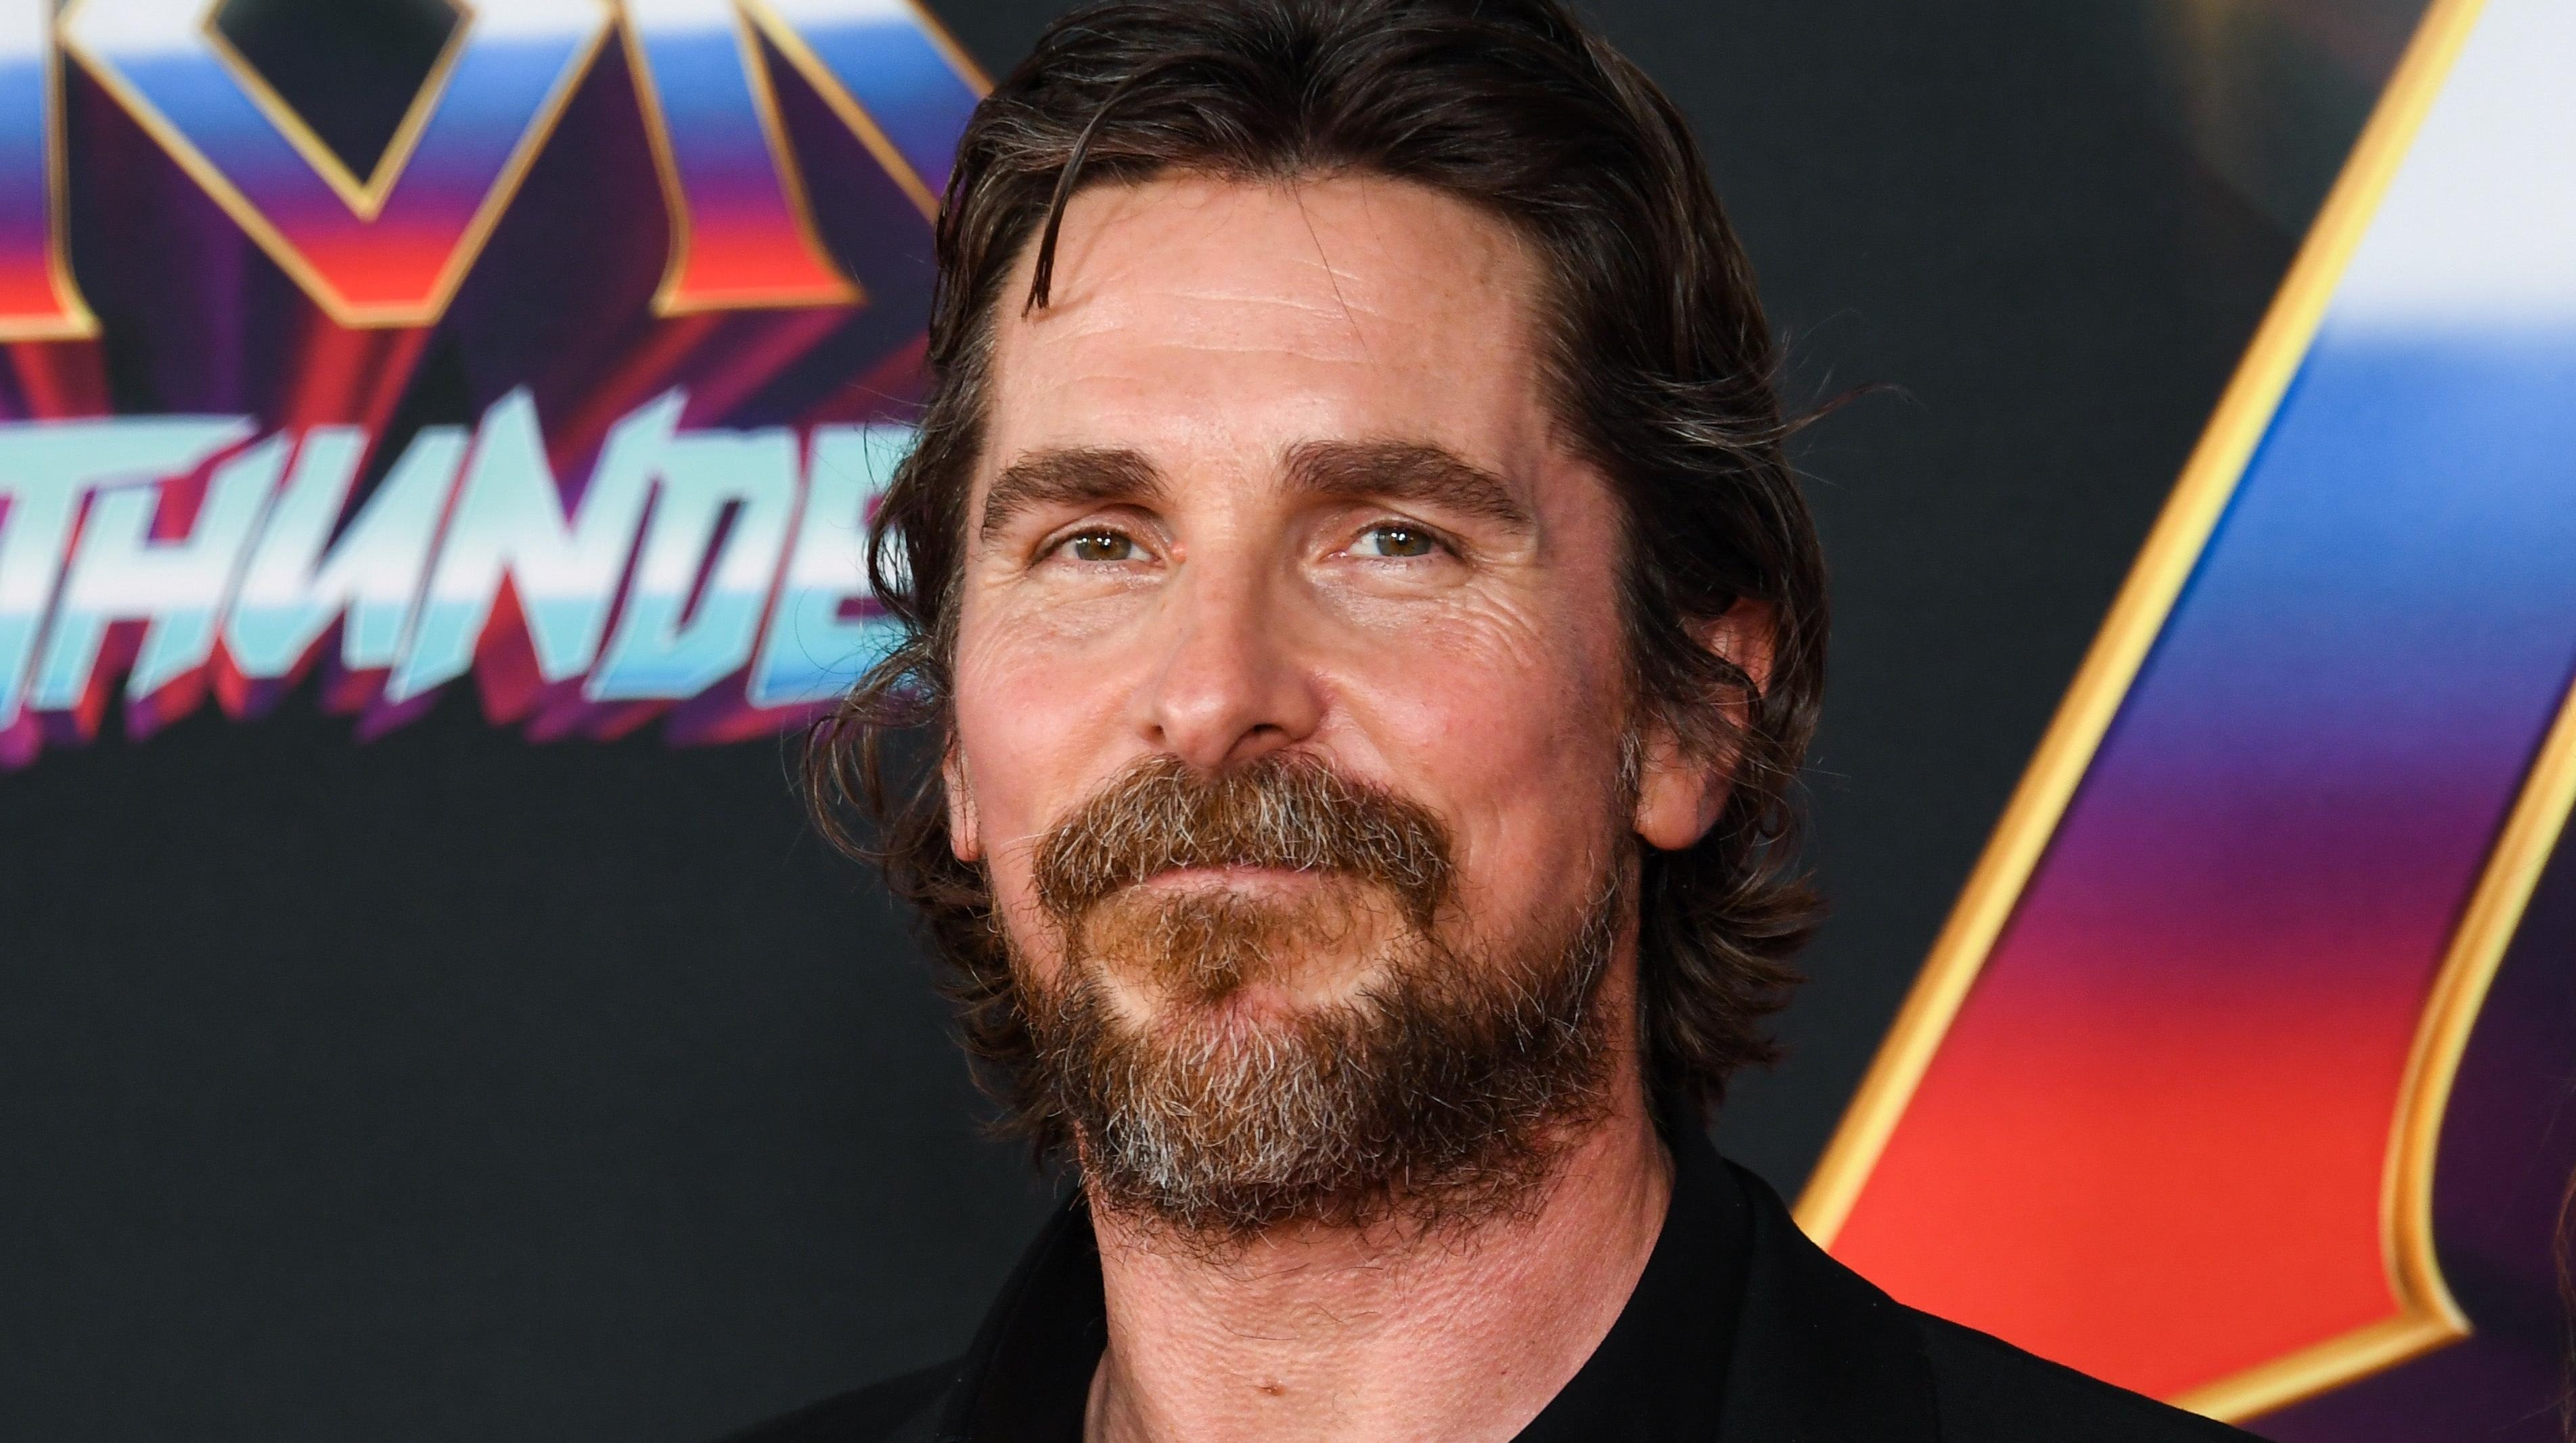 Christian Bale says he’d play Batman again—but only if Christopher Nolan is the director